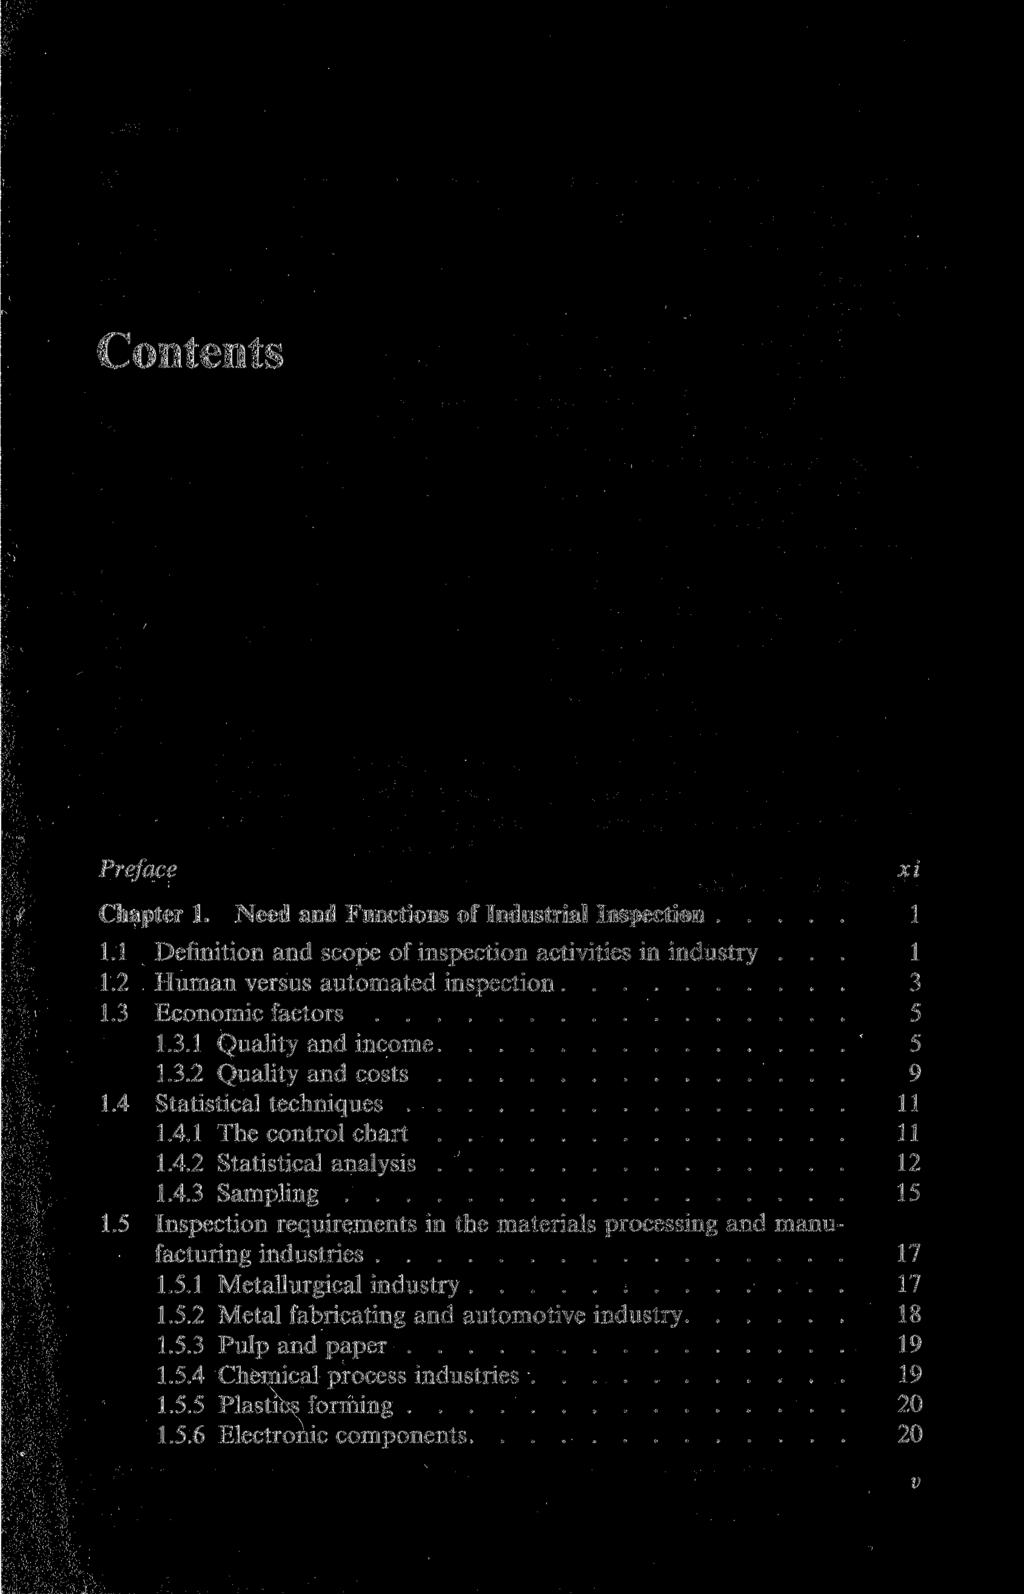 Contents Preface Chapter 1. Need and Functions of Industrial Inspection 1 1.1 Definition and scope of inspection activities in industry... 1 1.2 Human versus automated inspection 3 1.